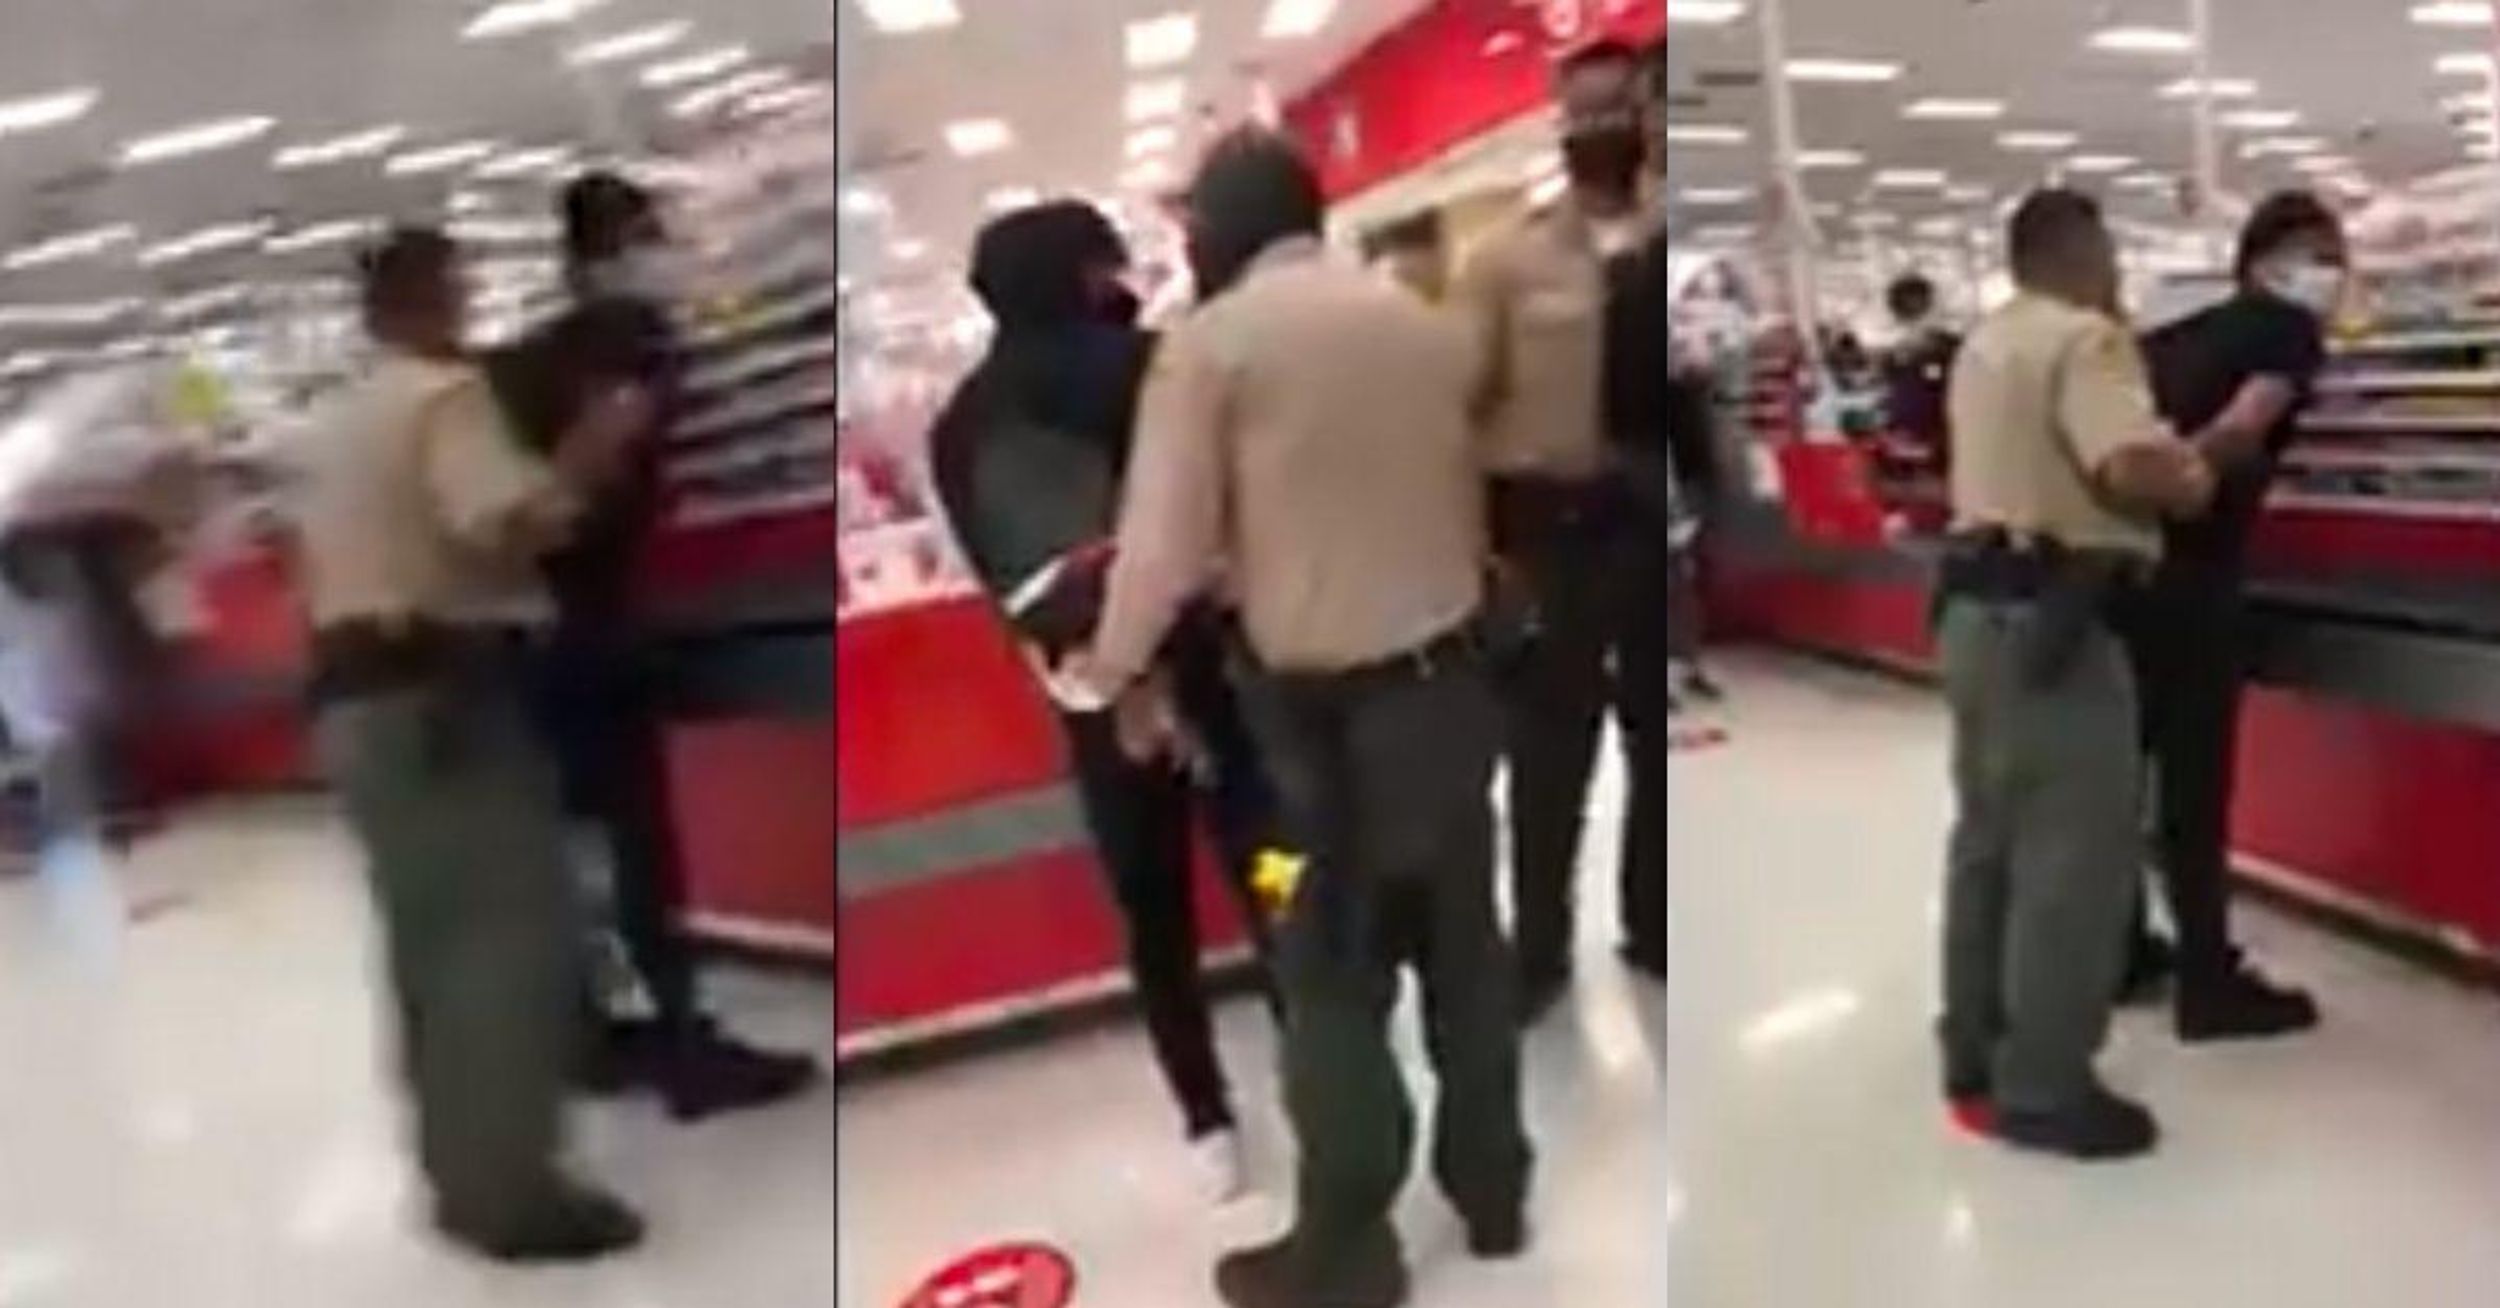 California Target Apologizes After Black Teens Were Detained And Falsely Accused Of Shoplifting